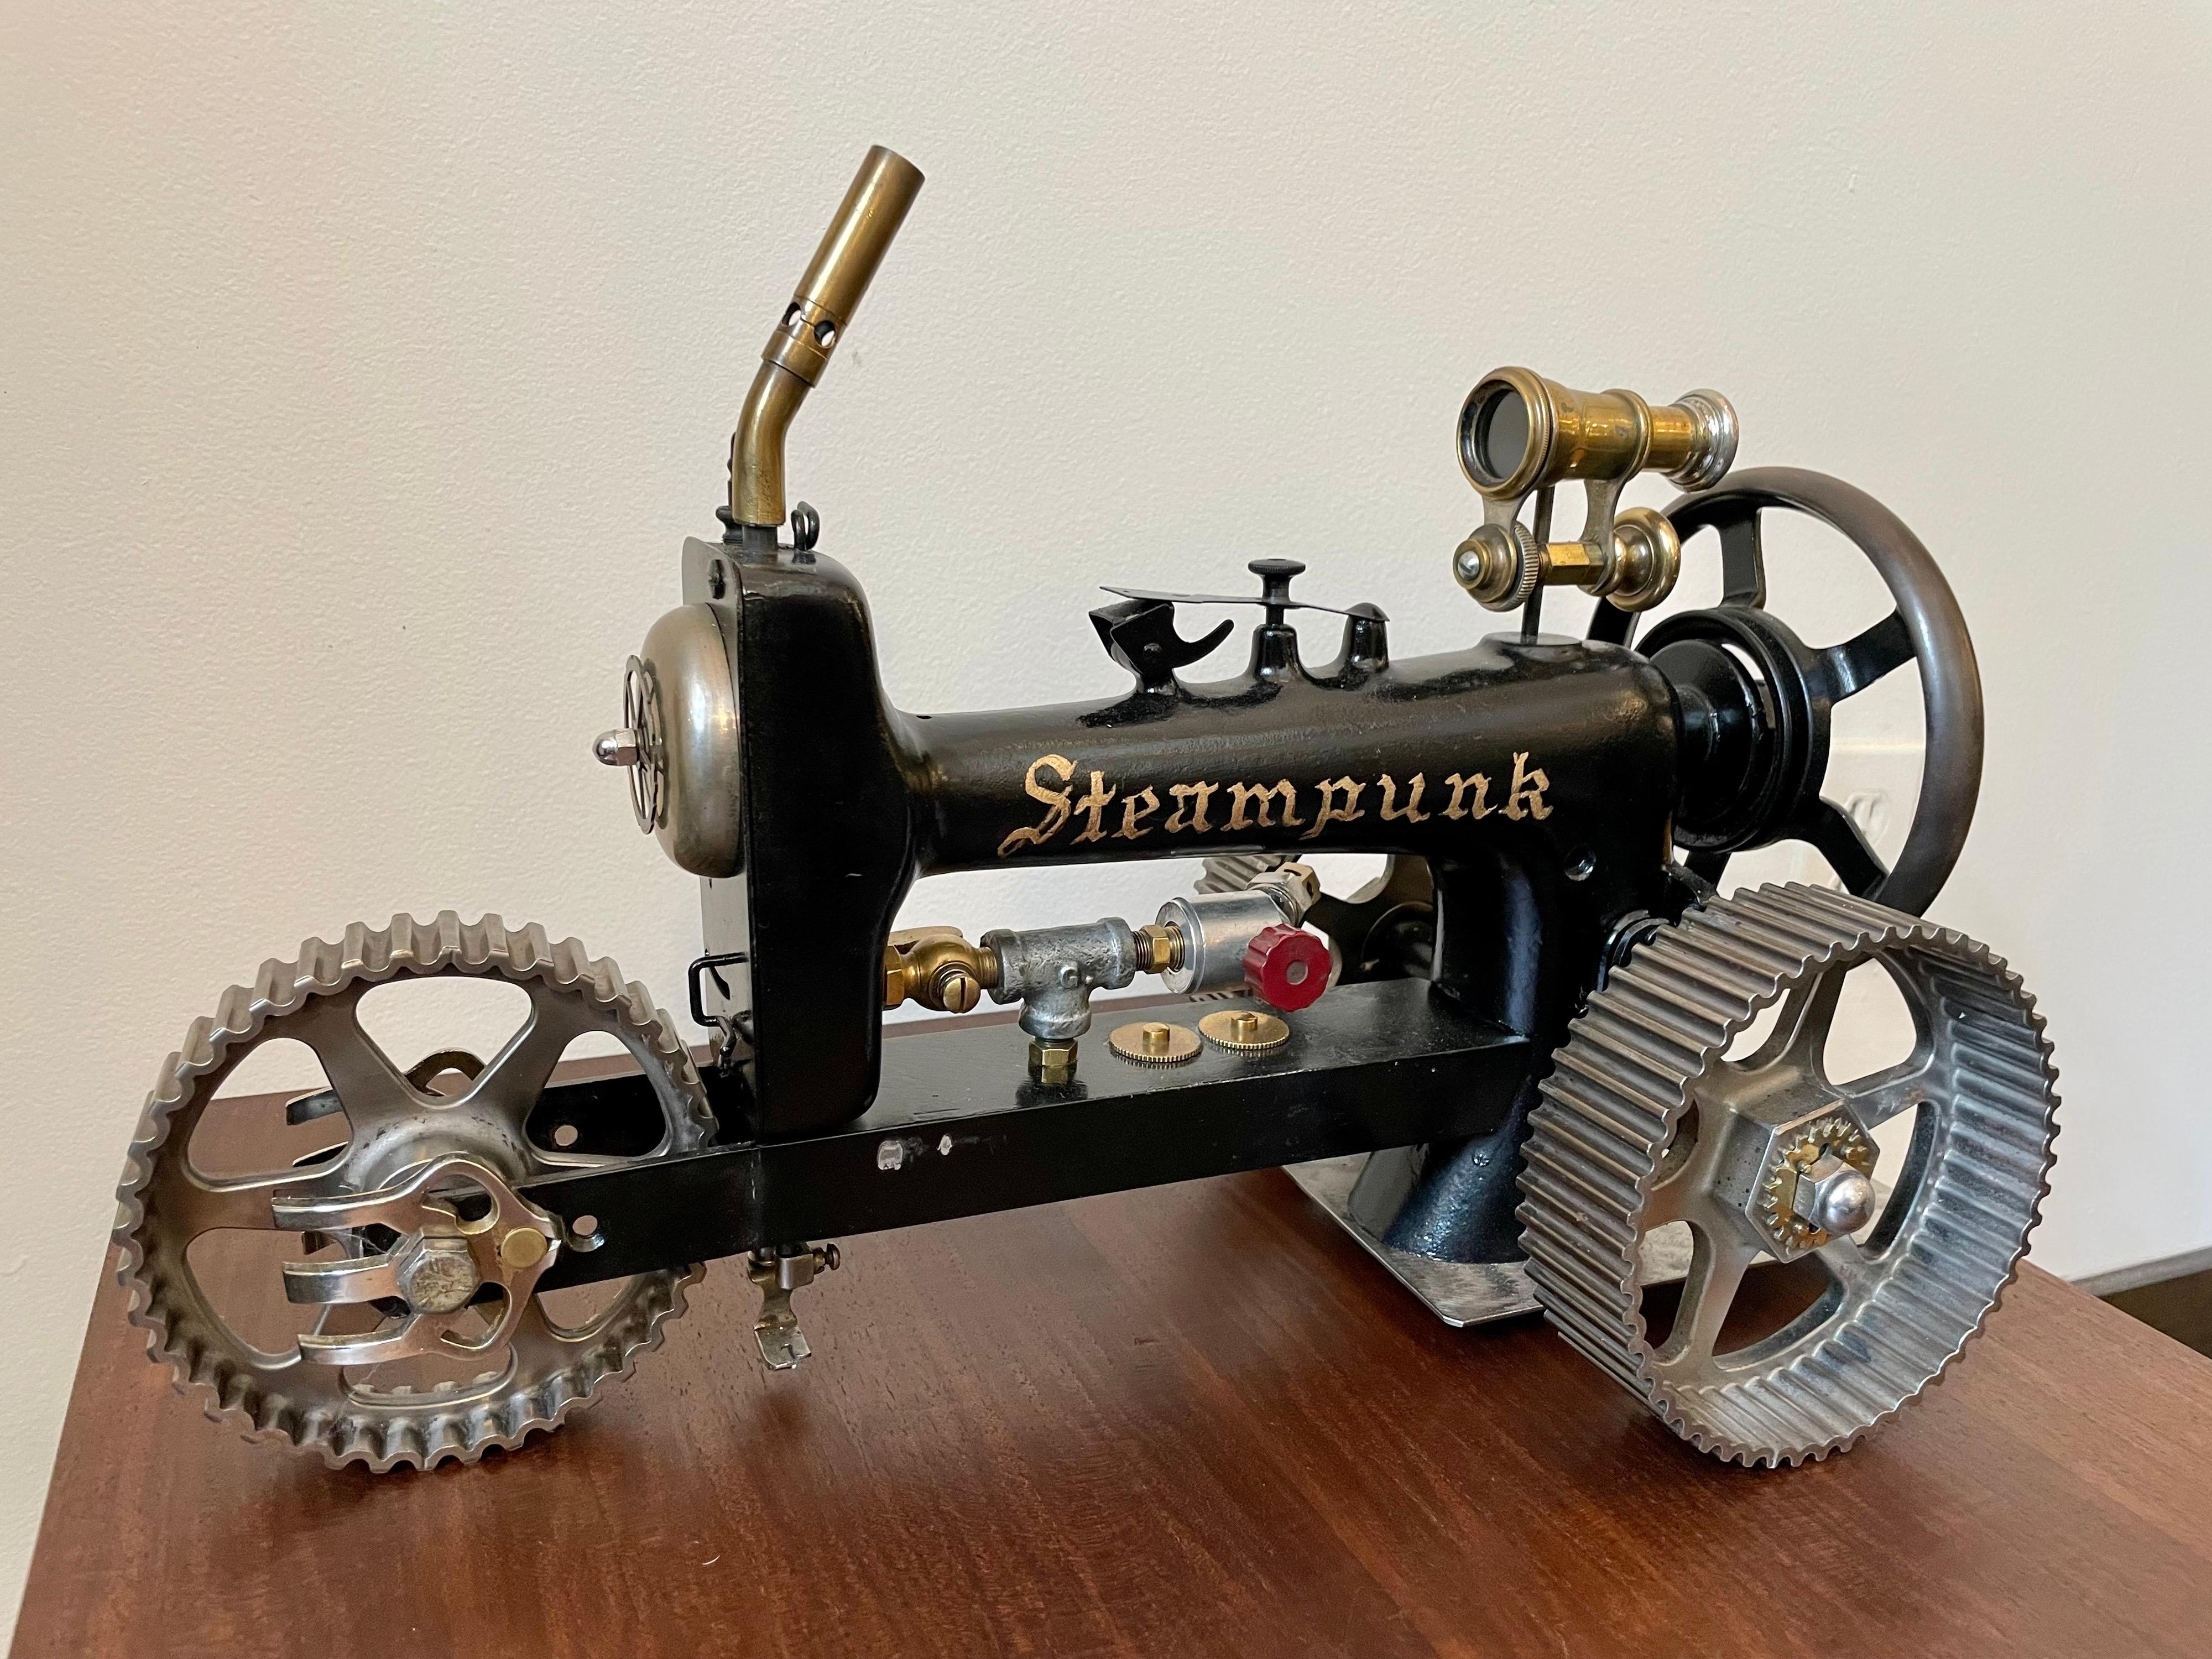 This amazingly creative sculpture is made from industrial components, including a vintage sewing machine. This masterpiece was made by Mr. T. Falk, who is 88 years old and creates one-of-a-kind sculptures. This is signed and stamped to bottom. Very